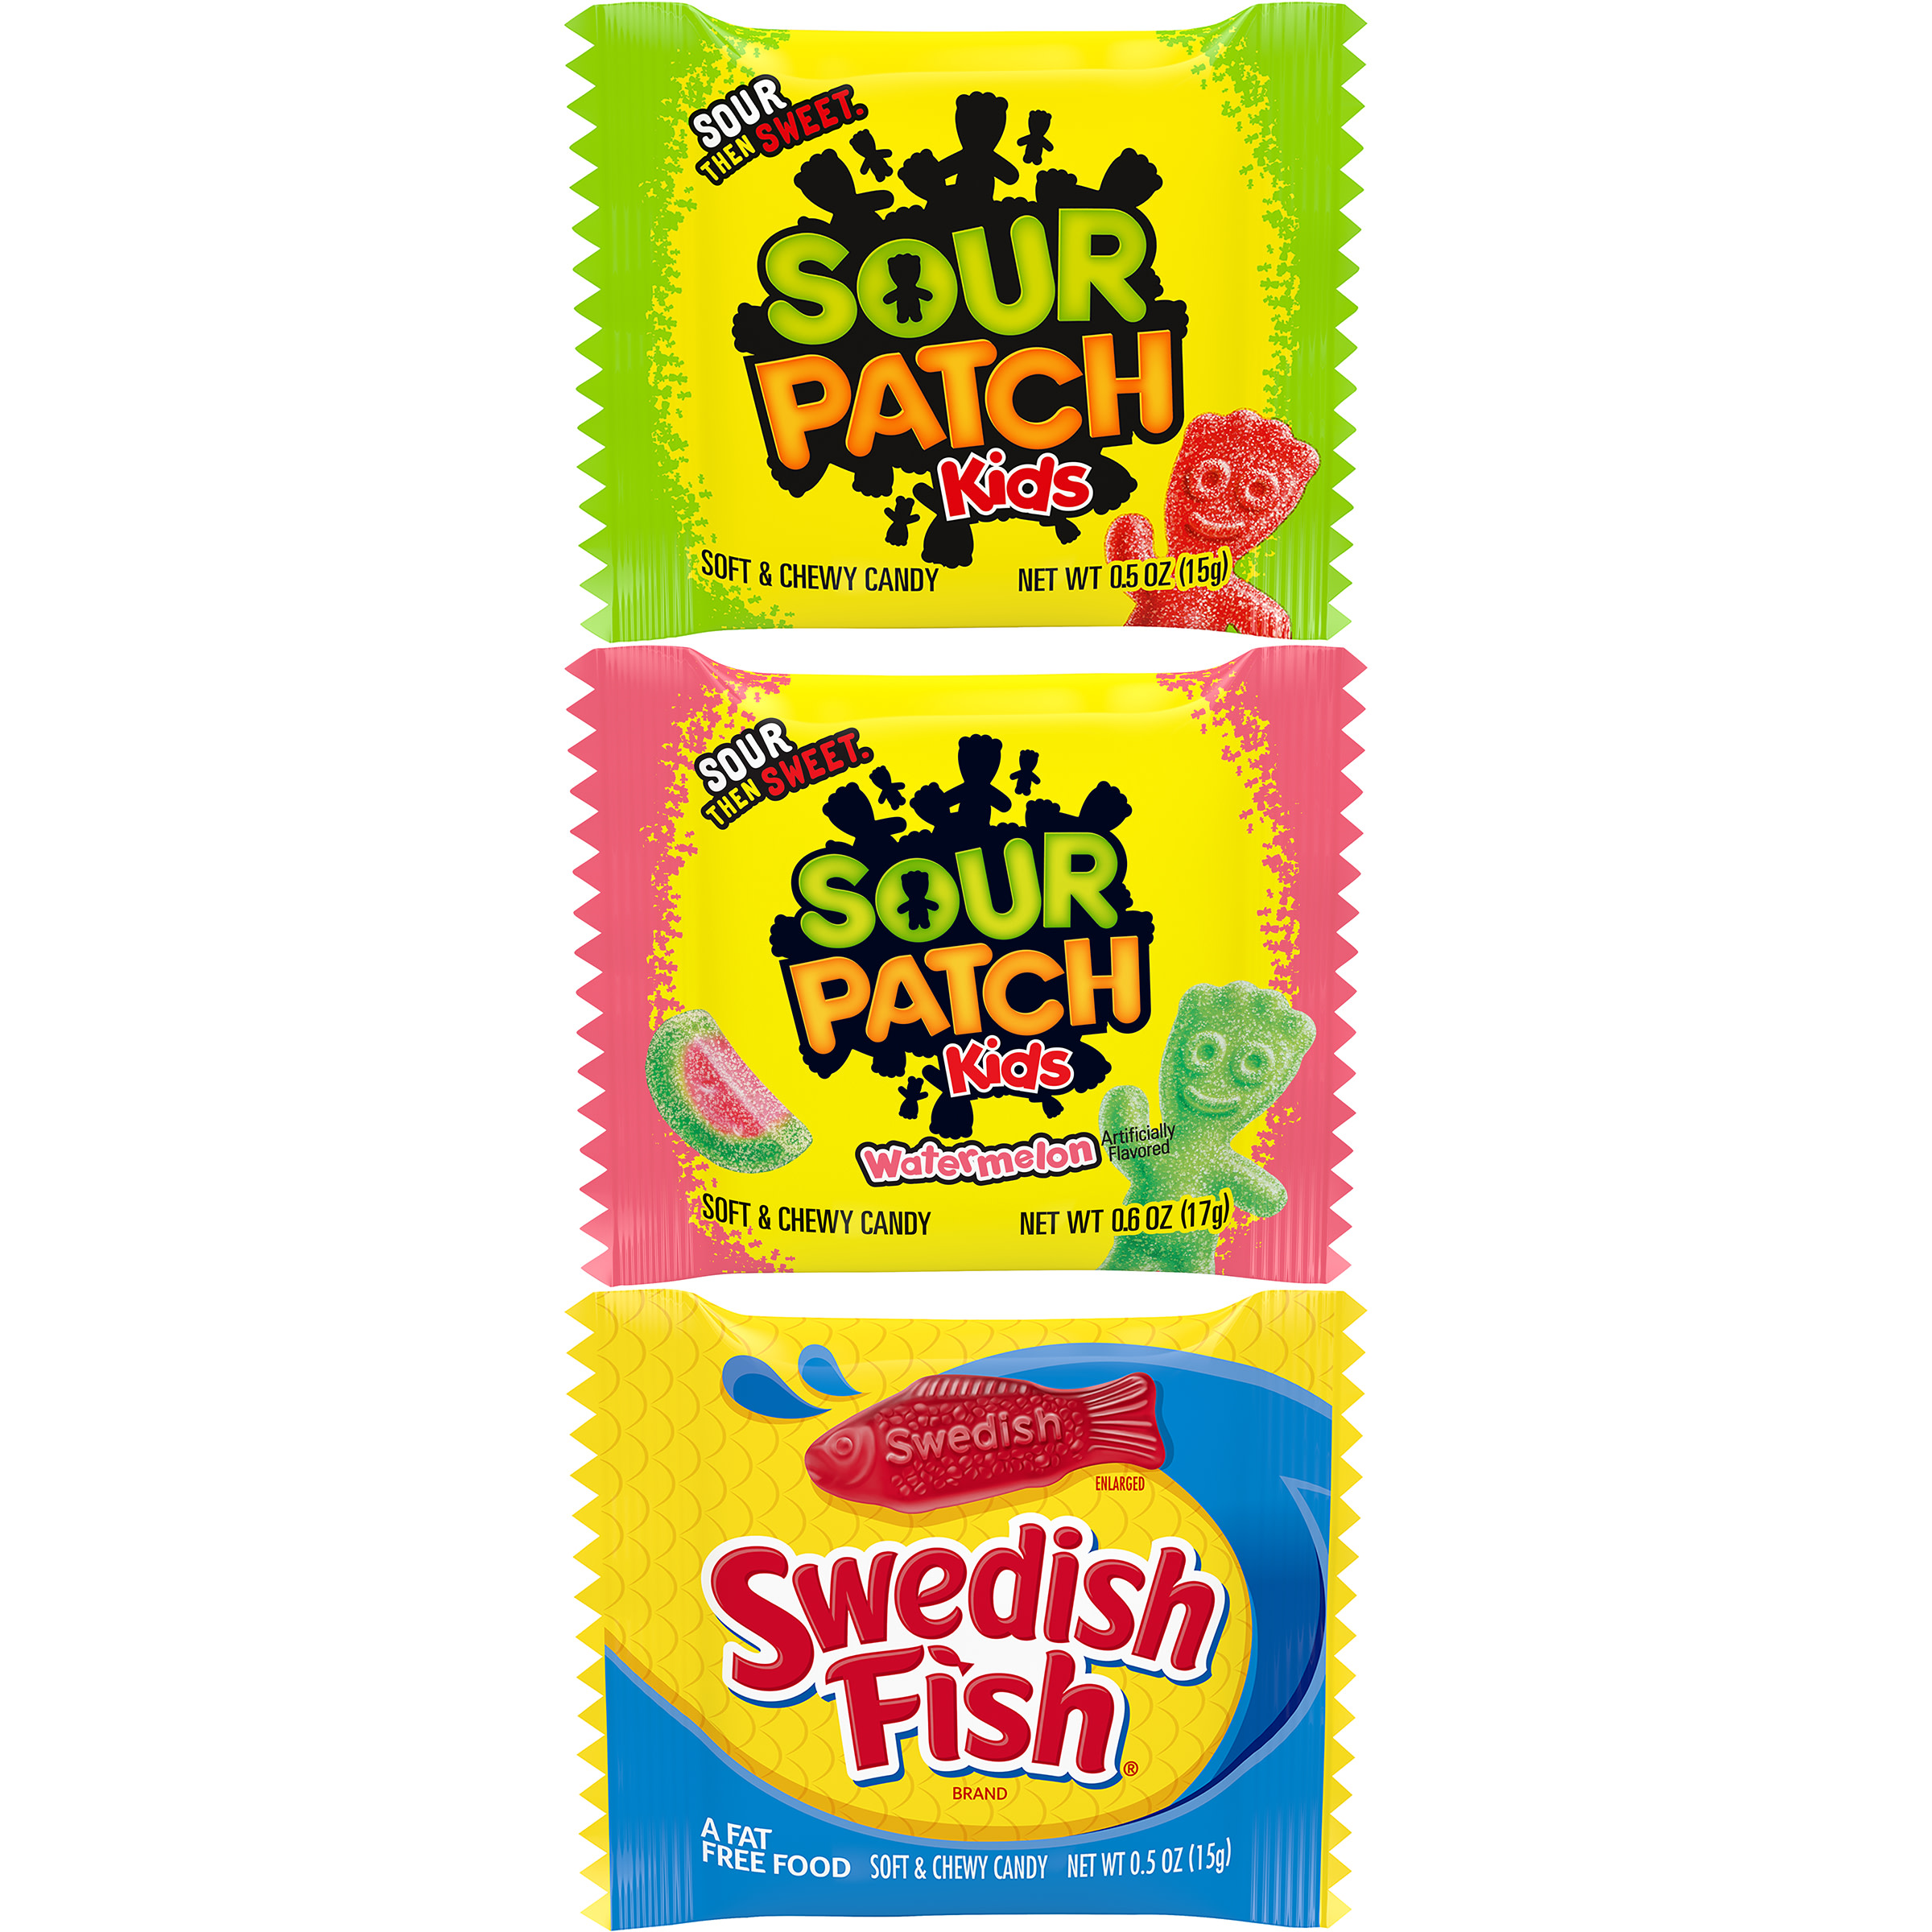 SOUR PATCH KIDS Candy (Original and Watermelon) and SWEDISH FISH Candy Halloween Candy Variety Pack, 1 - 100 Trick or Treat Snack Packs - image 3 of 20